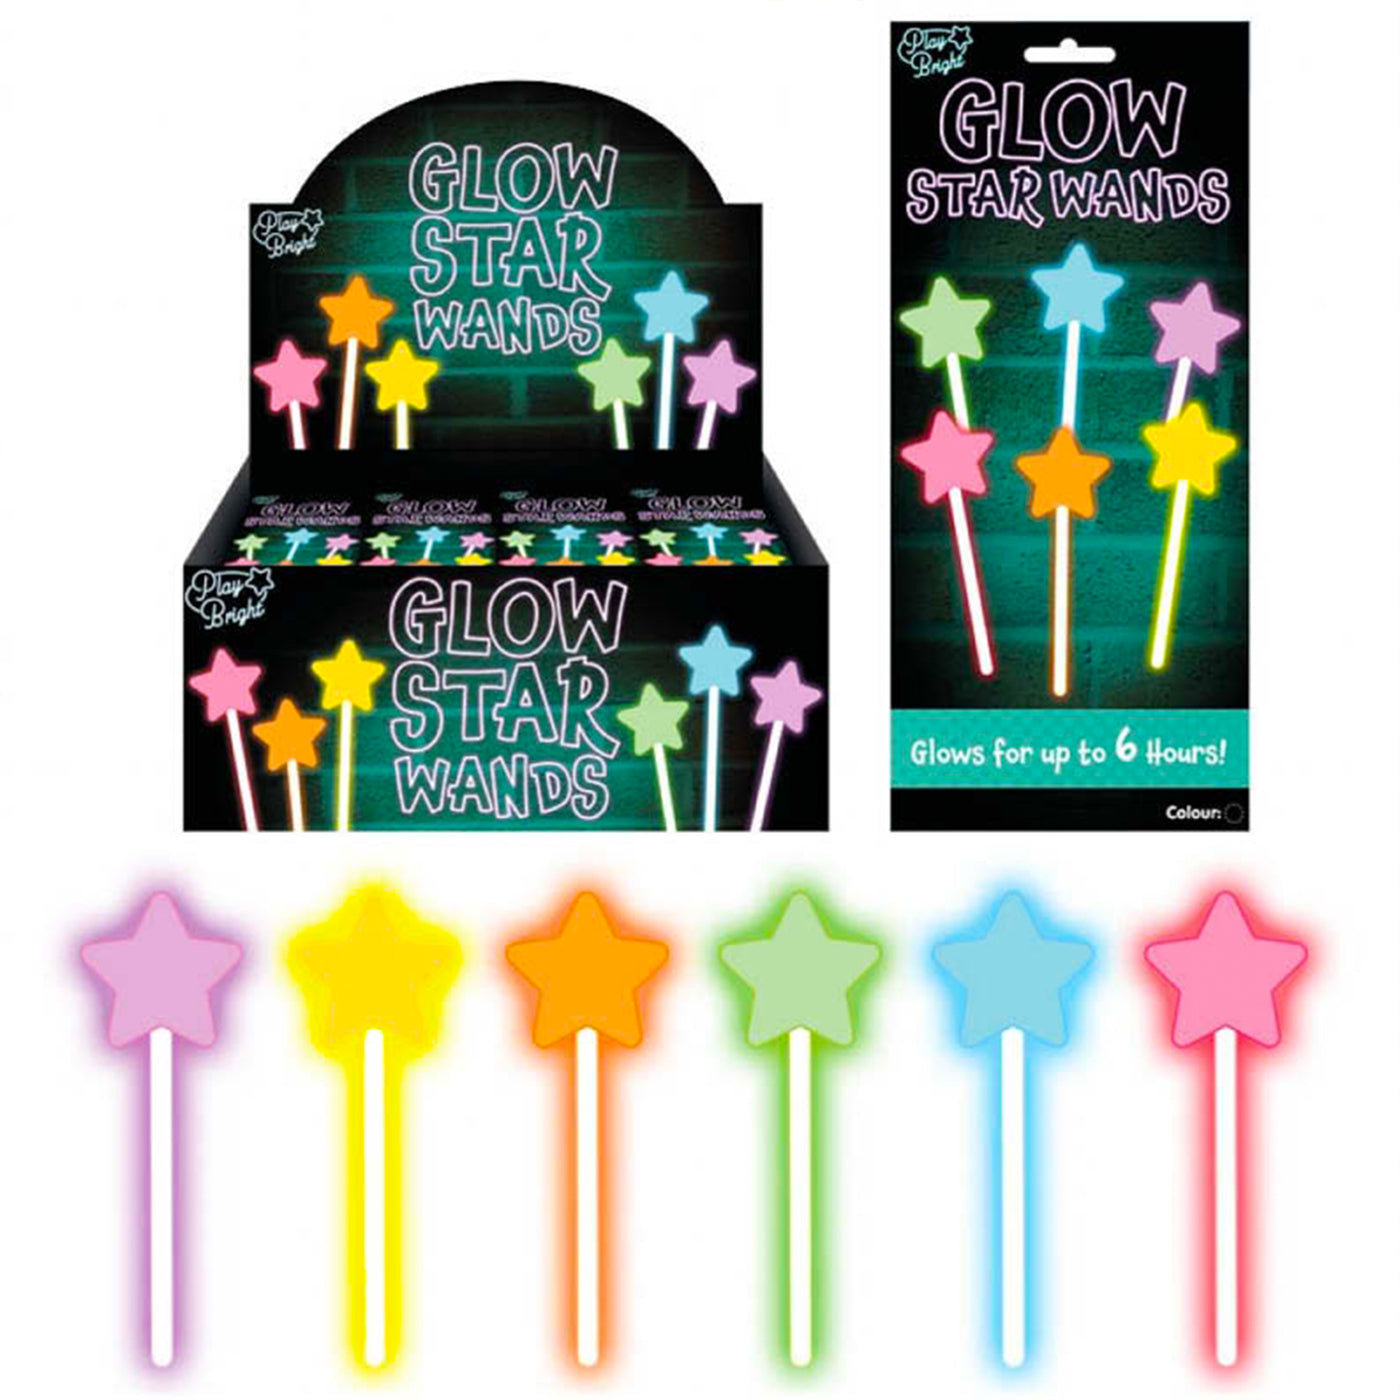 Unisex Pre Filled Neon Glow Party Goody Bags With Glow Toys And Sweets, Party Favours For Boys And Girls.